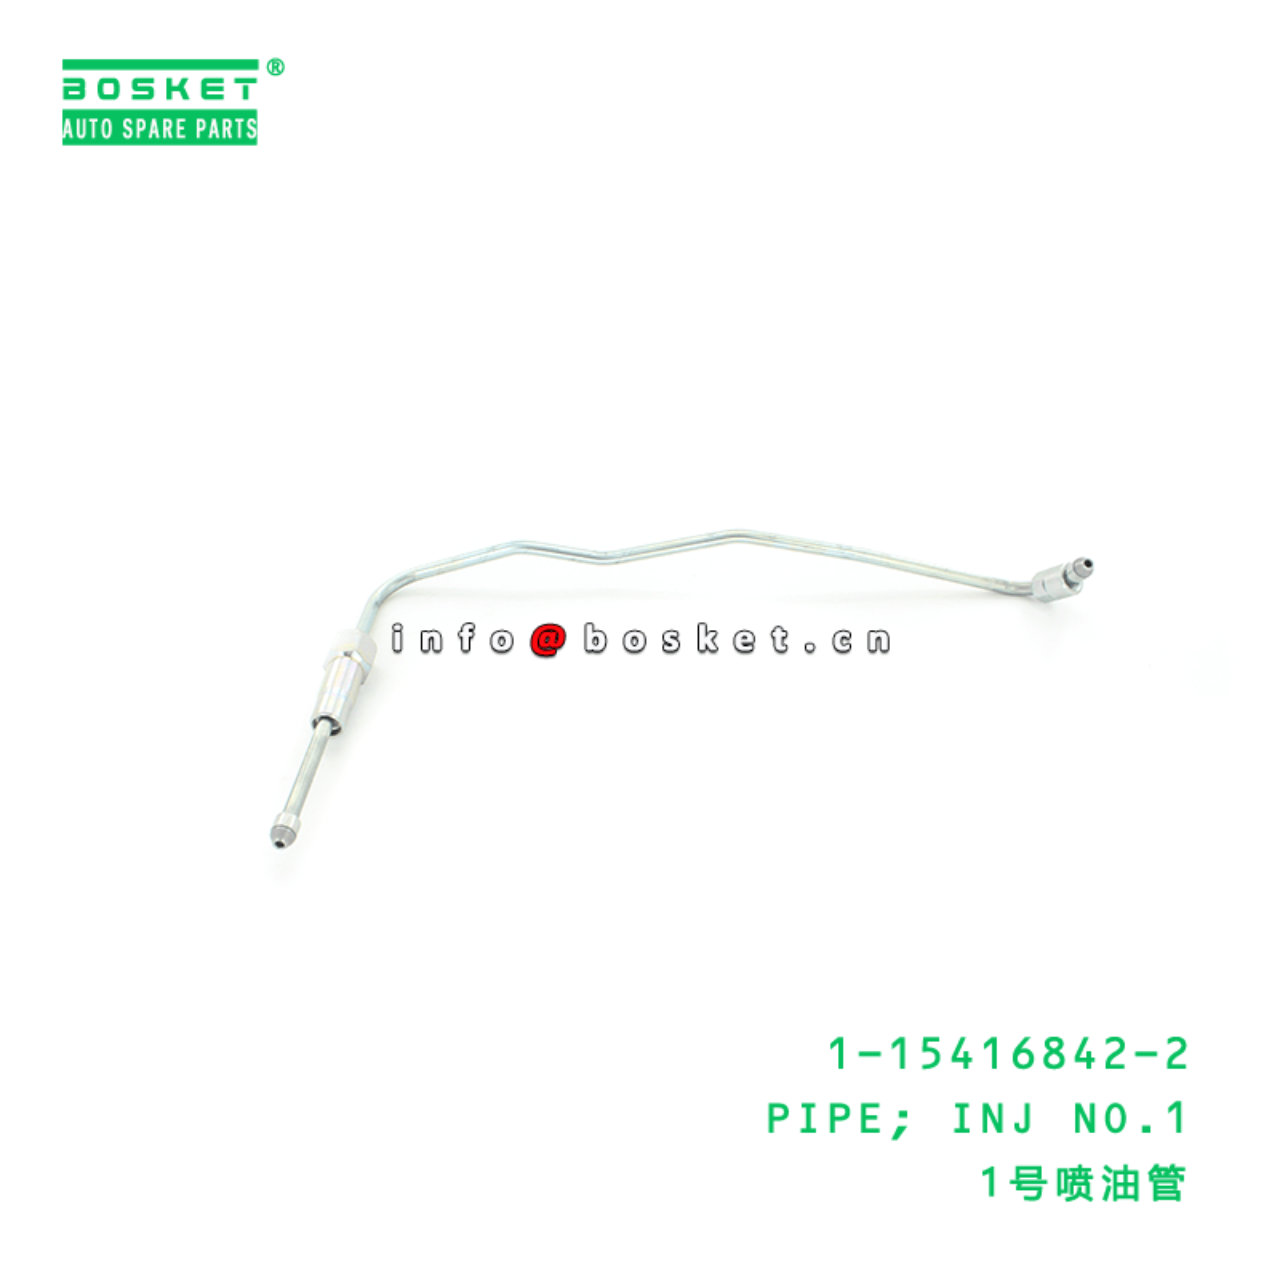 1-15416842-2 Injection No.1 Pipe 1154168422 Suitable for ISUZU CXZ 6WF1